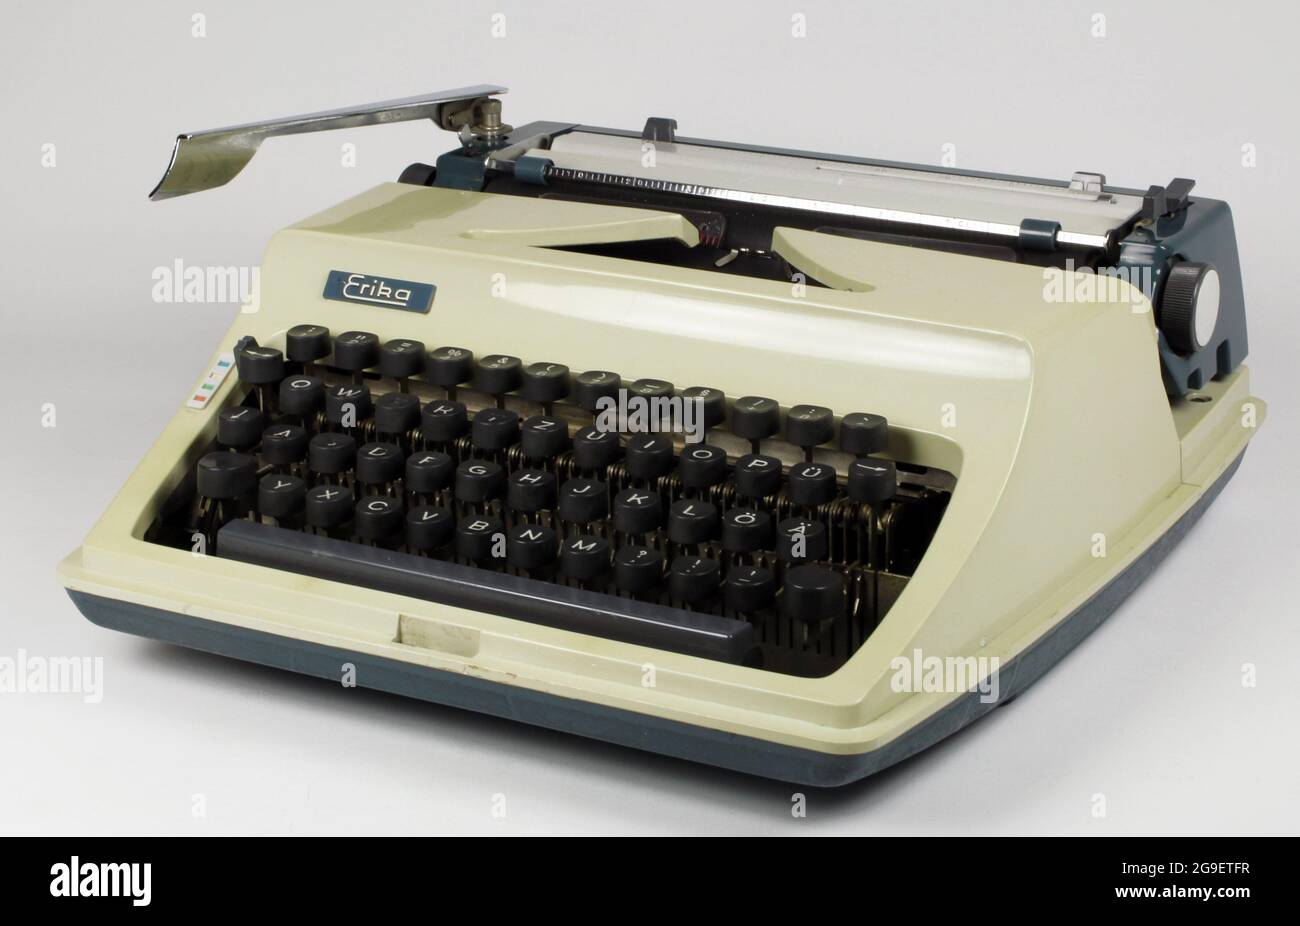 technics, mechanical portable typewriter Erika 33, device case with synthetic material, ADDITIONAL-RIGHTS-CLEARANCE-INFO-NOT-AVAILABLE Stock Photo